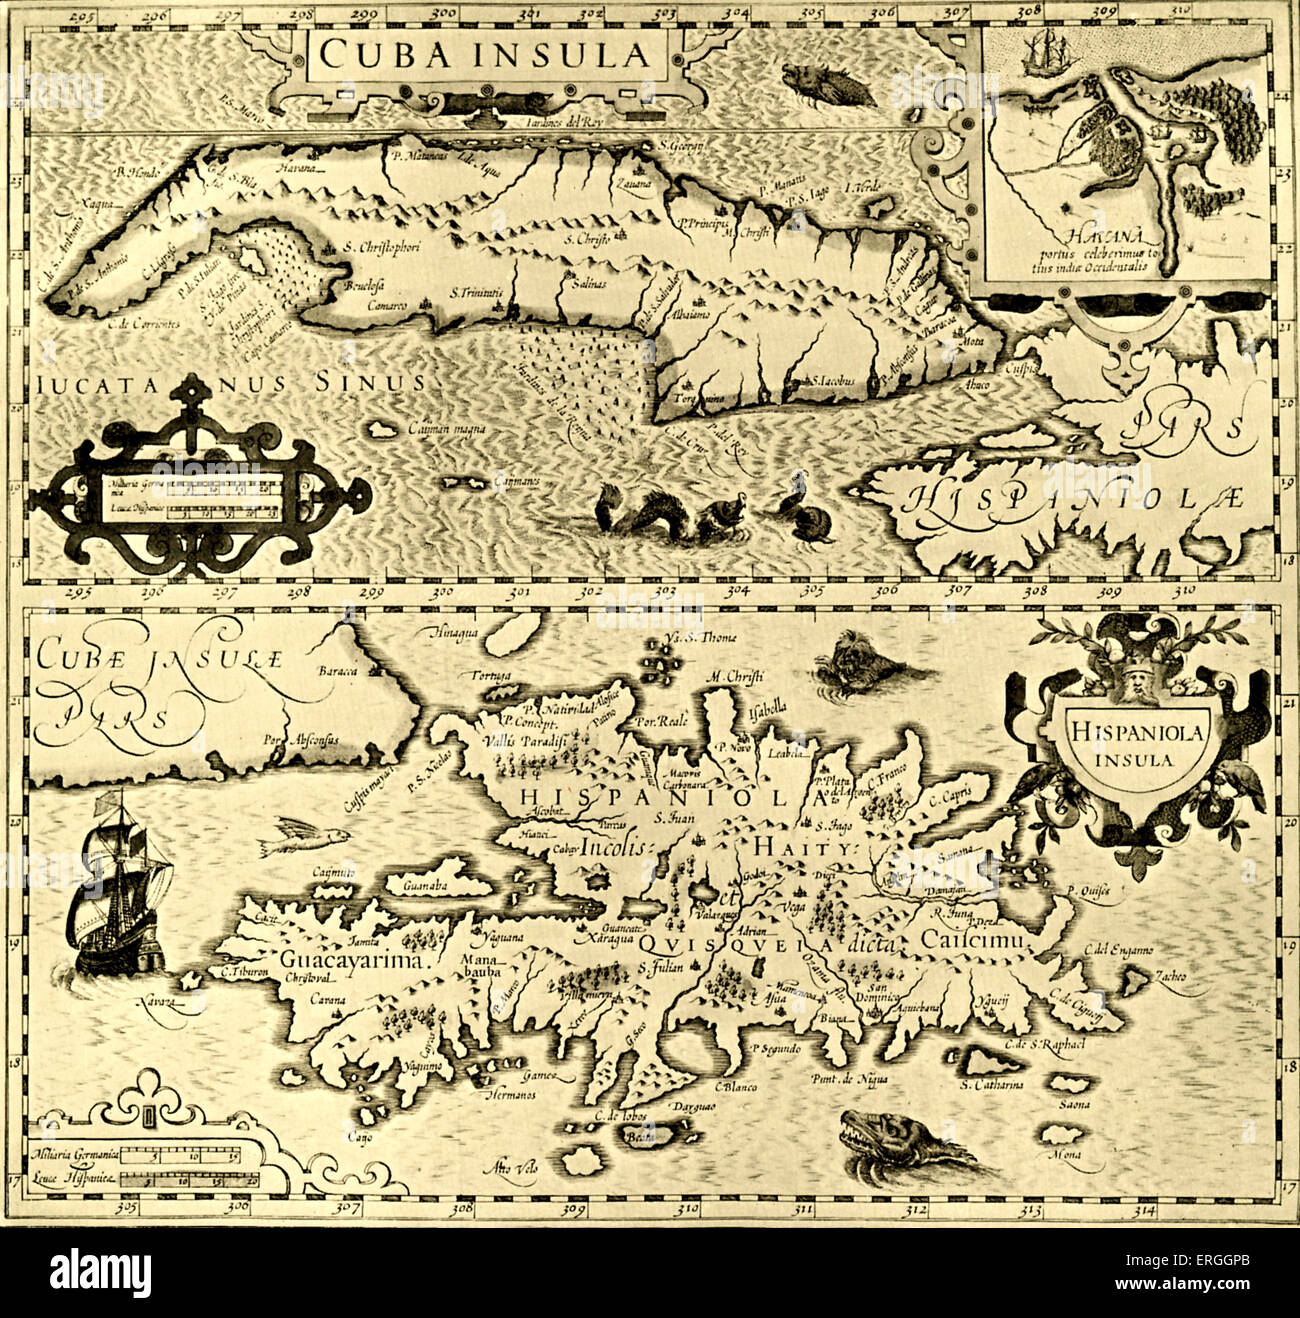 Map of Cuba and Hispaniola  published in Mercator's Atlas. Amsterdam, 1633. Stock Photo